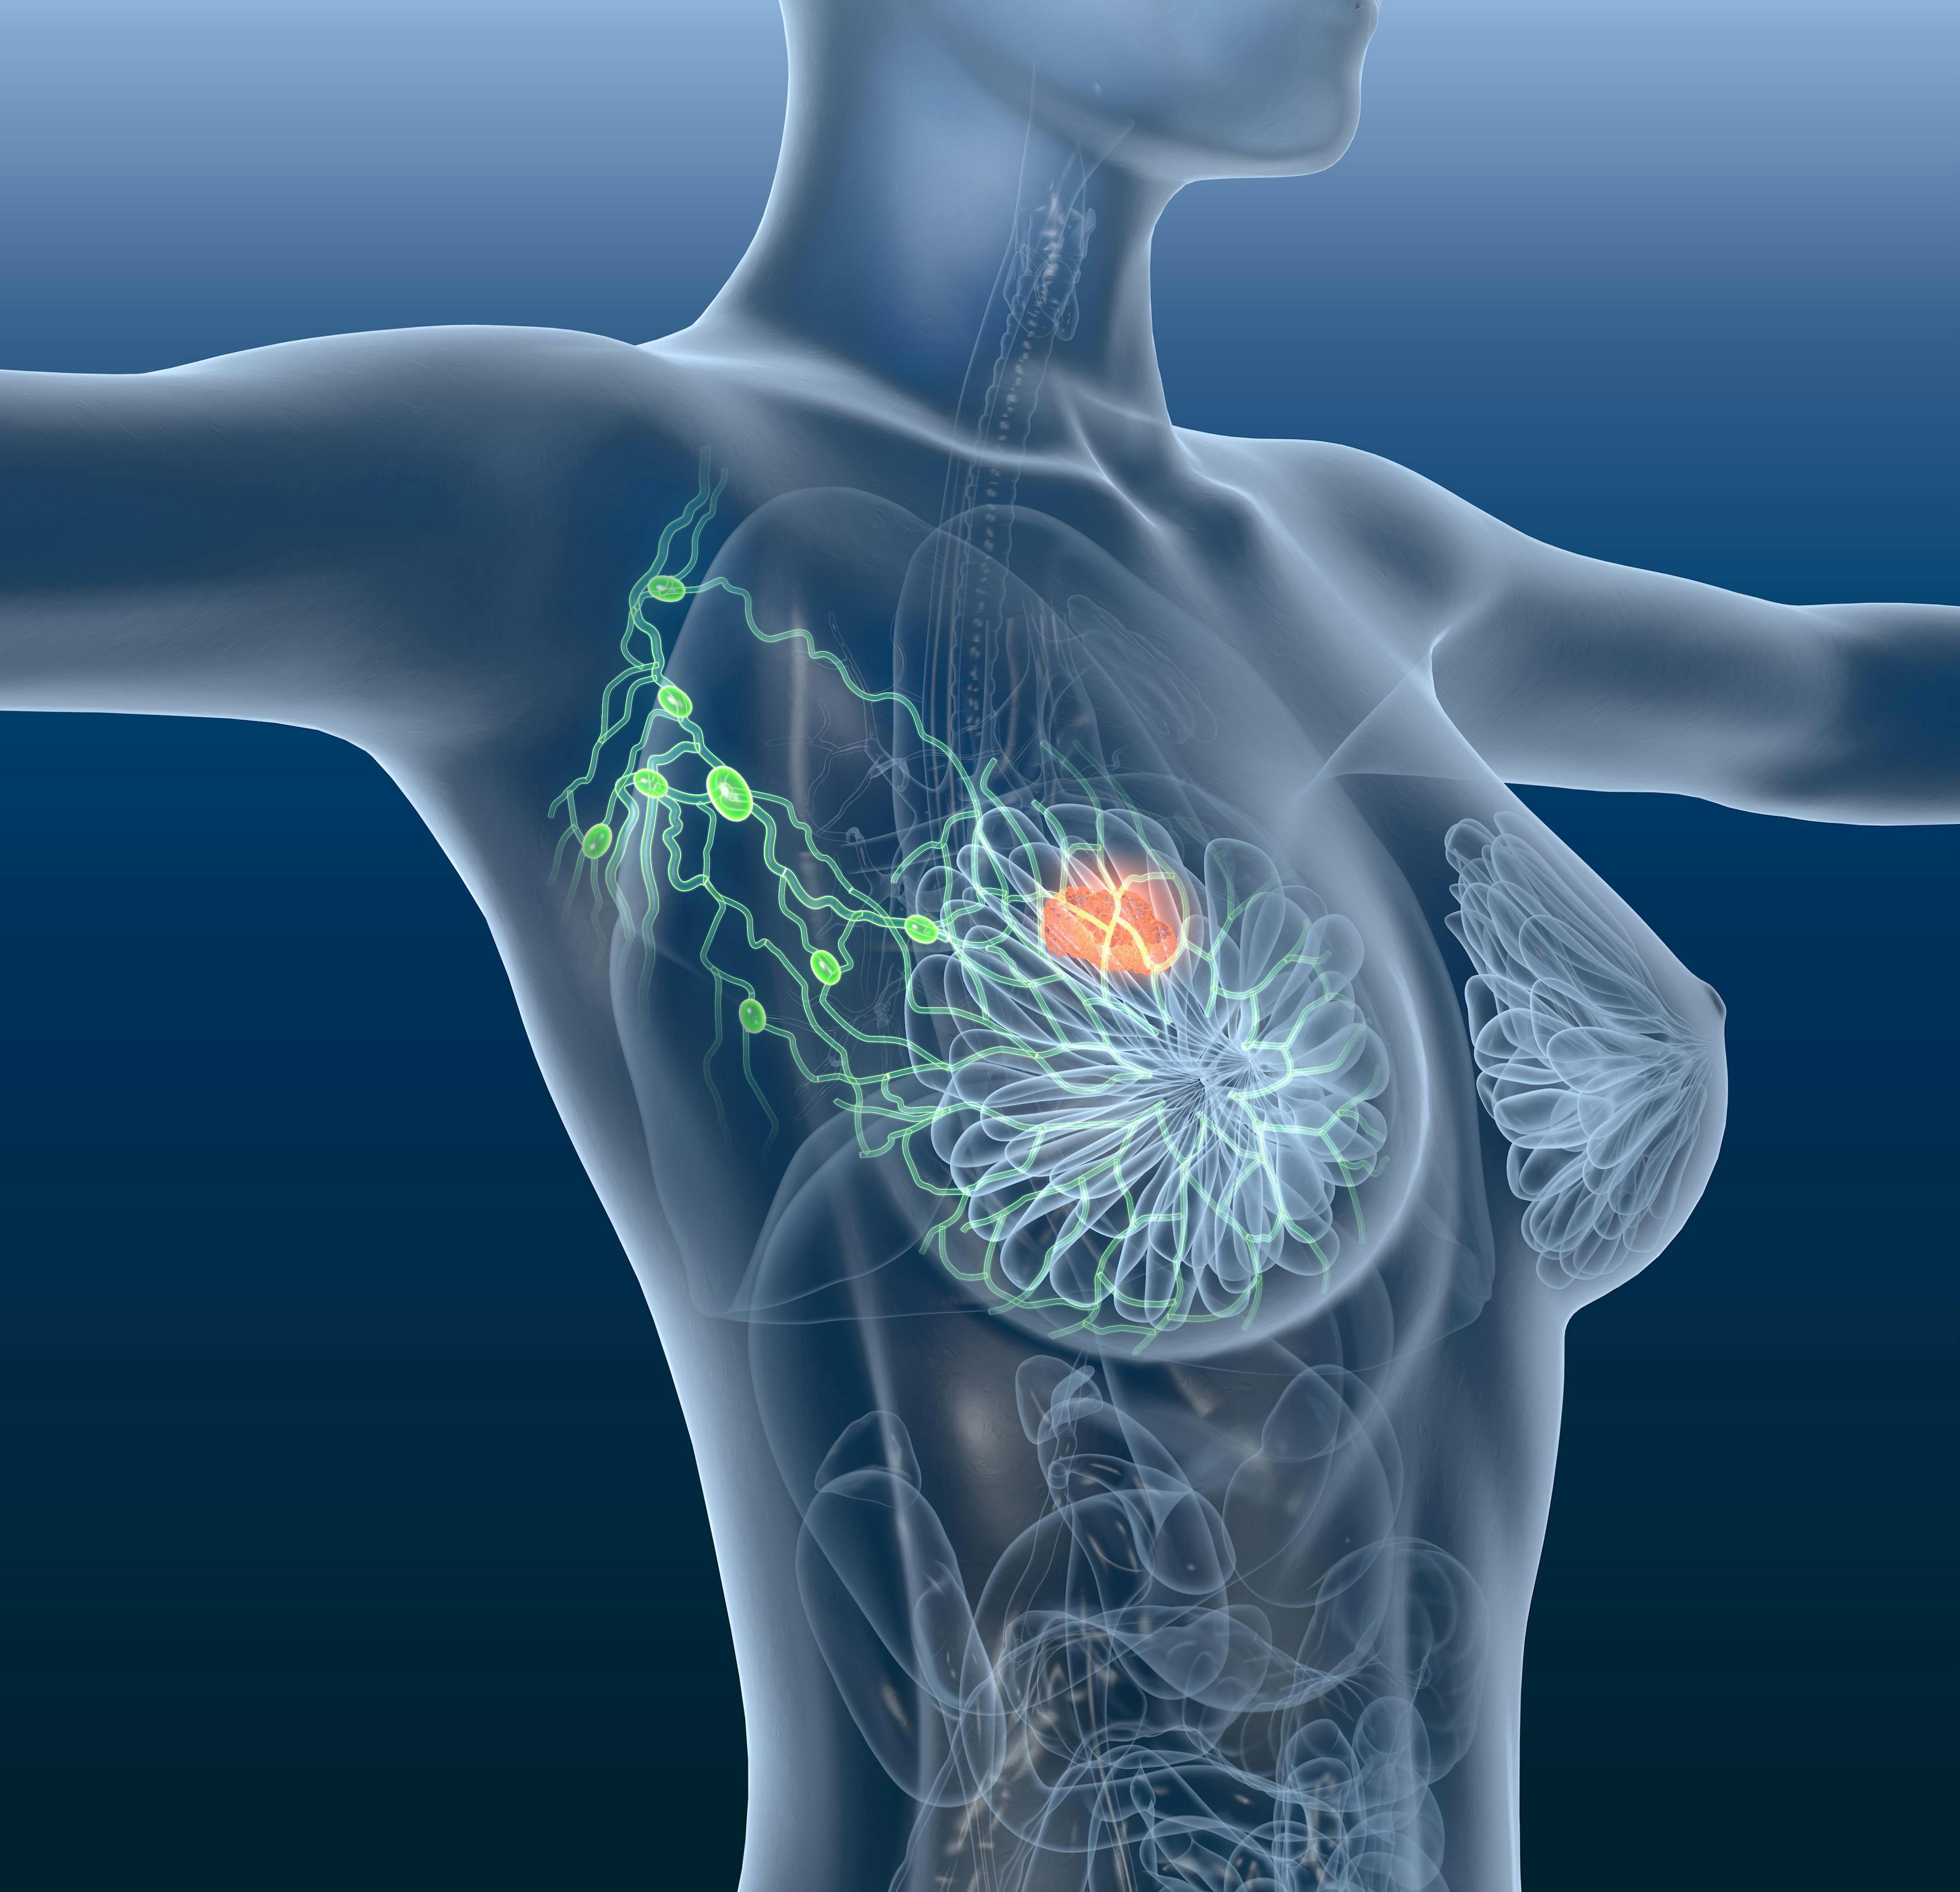 Patients with operable, locally advanced triple-negative breast cancer experienced notable improvements in survival following treatment with neoadjuvant carboplatin plus sequential taxane-anthracycline neoadjuvant chemotherapy.